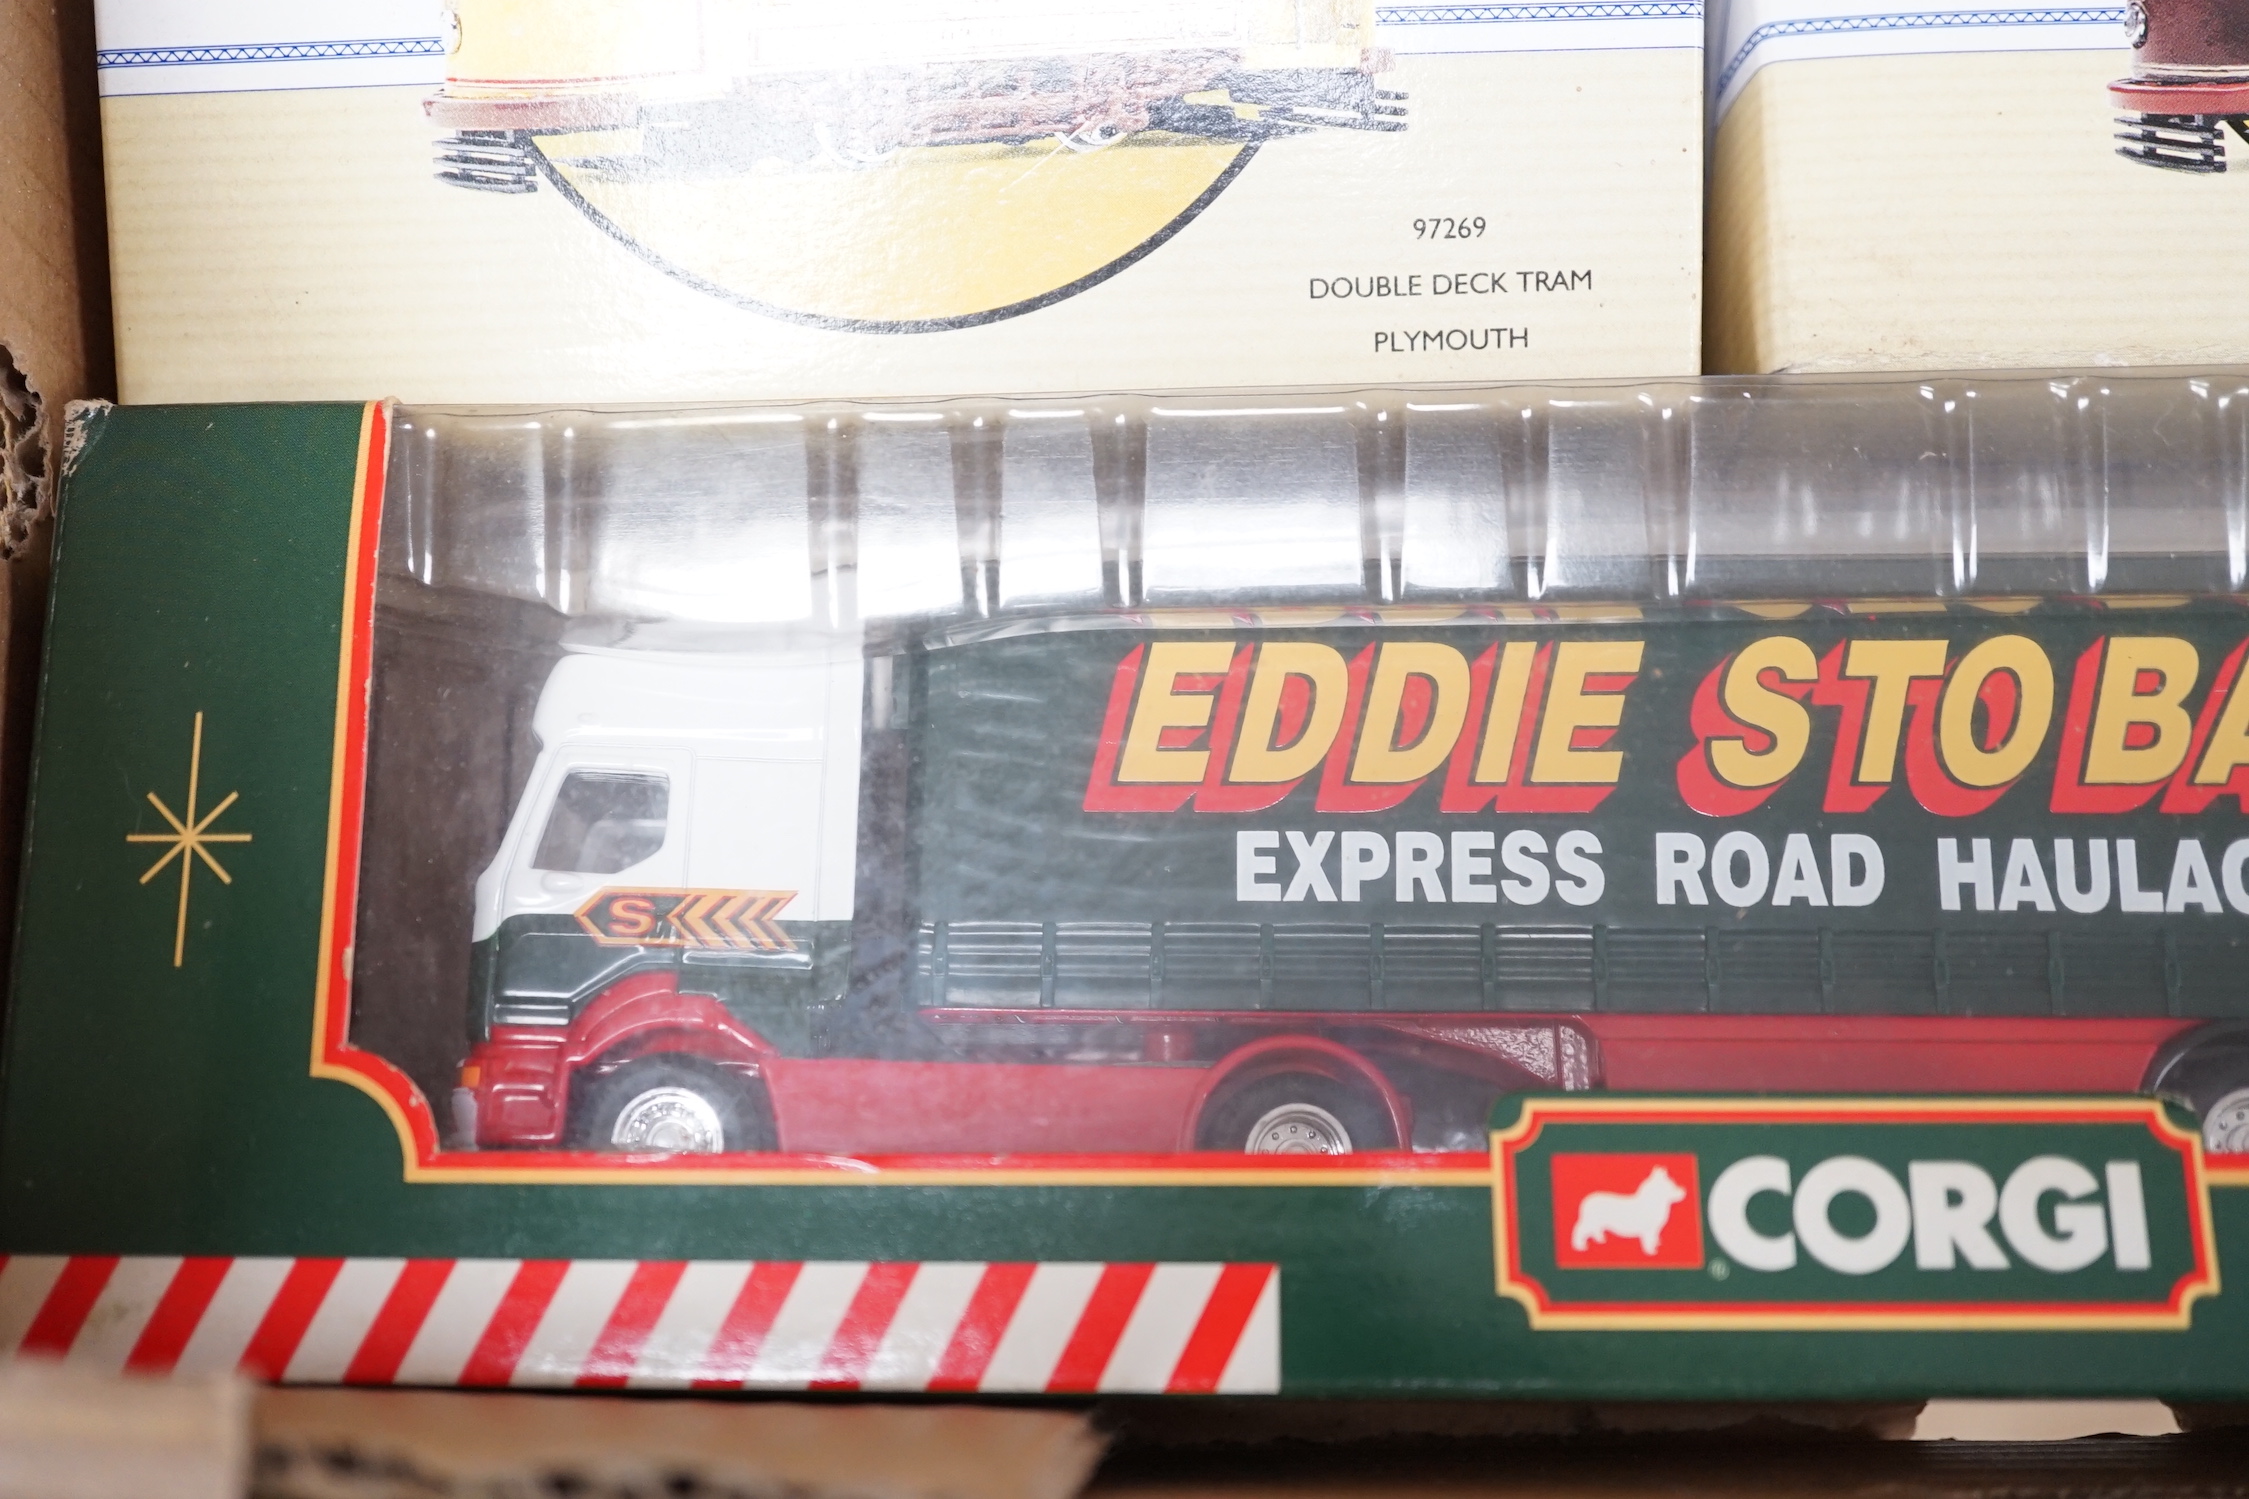 Eight boxed Corgi toys and two other die-cast models including; Eddie Stobart commercial vehicles, two Guy Arab buses, two double deck trams, etc.